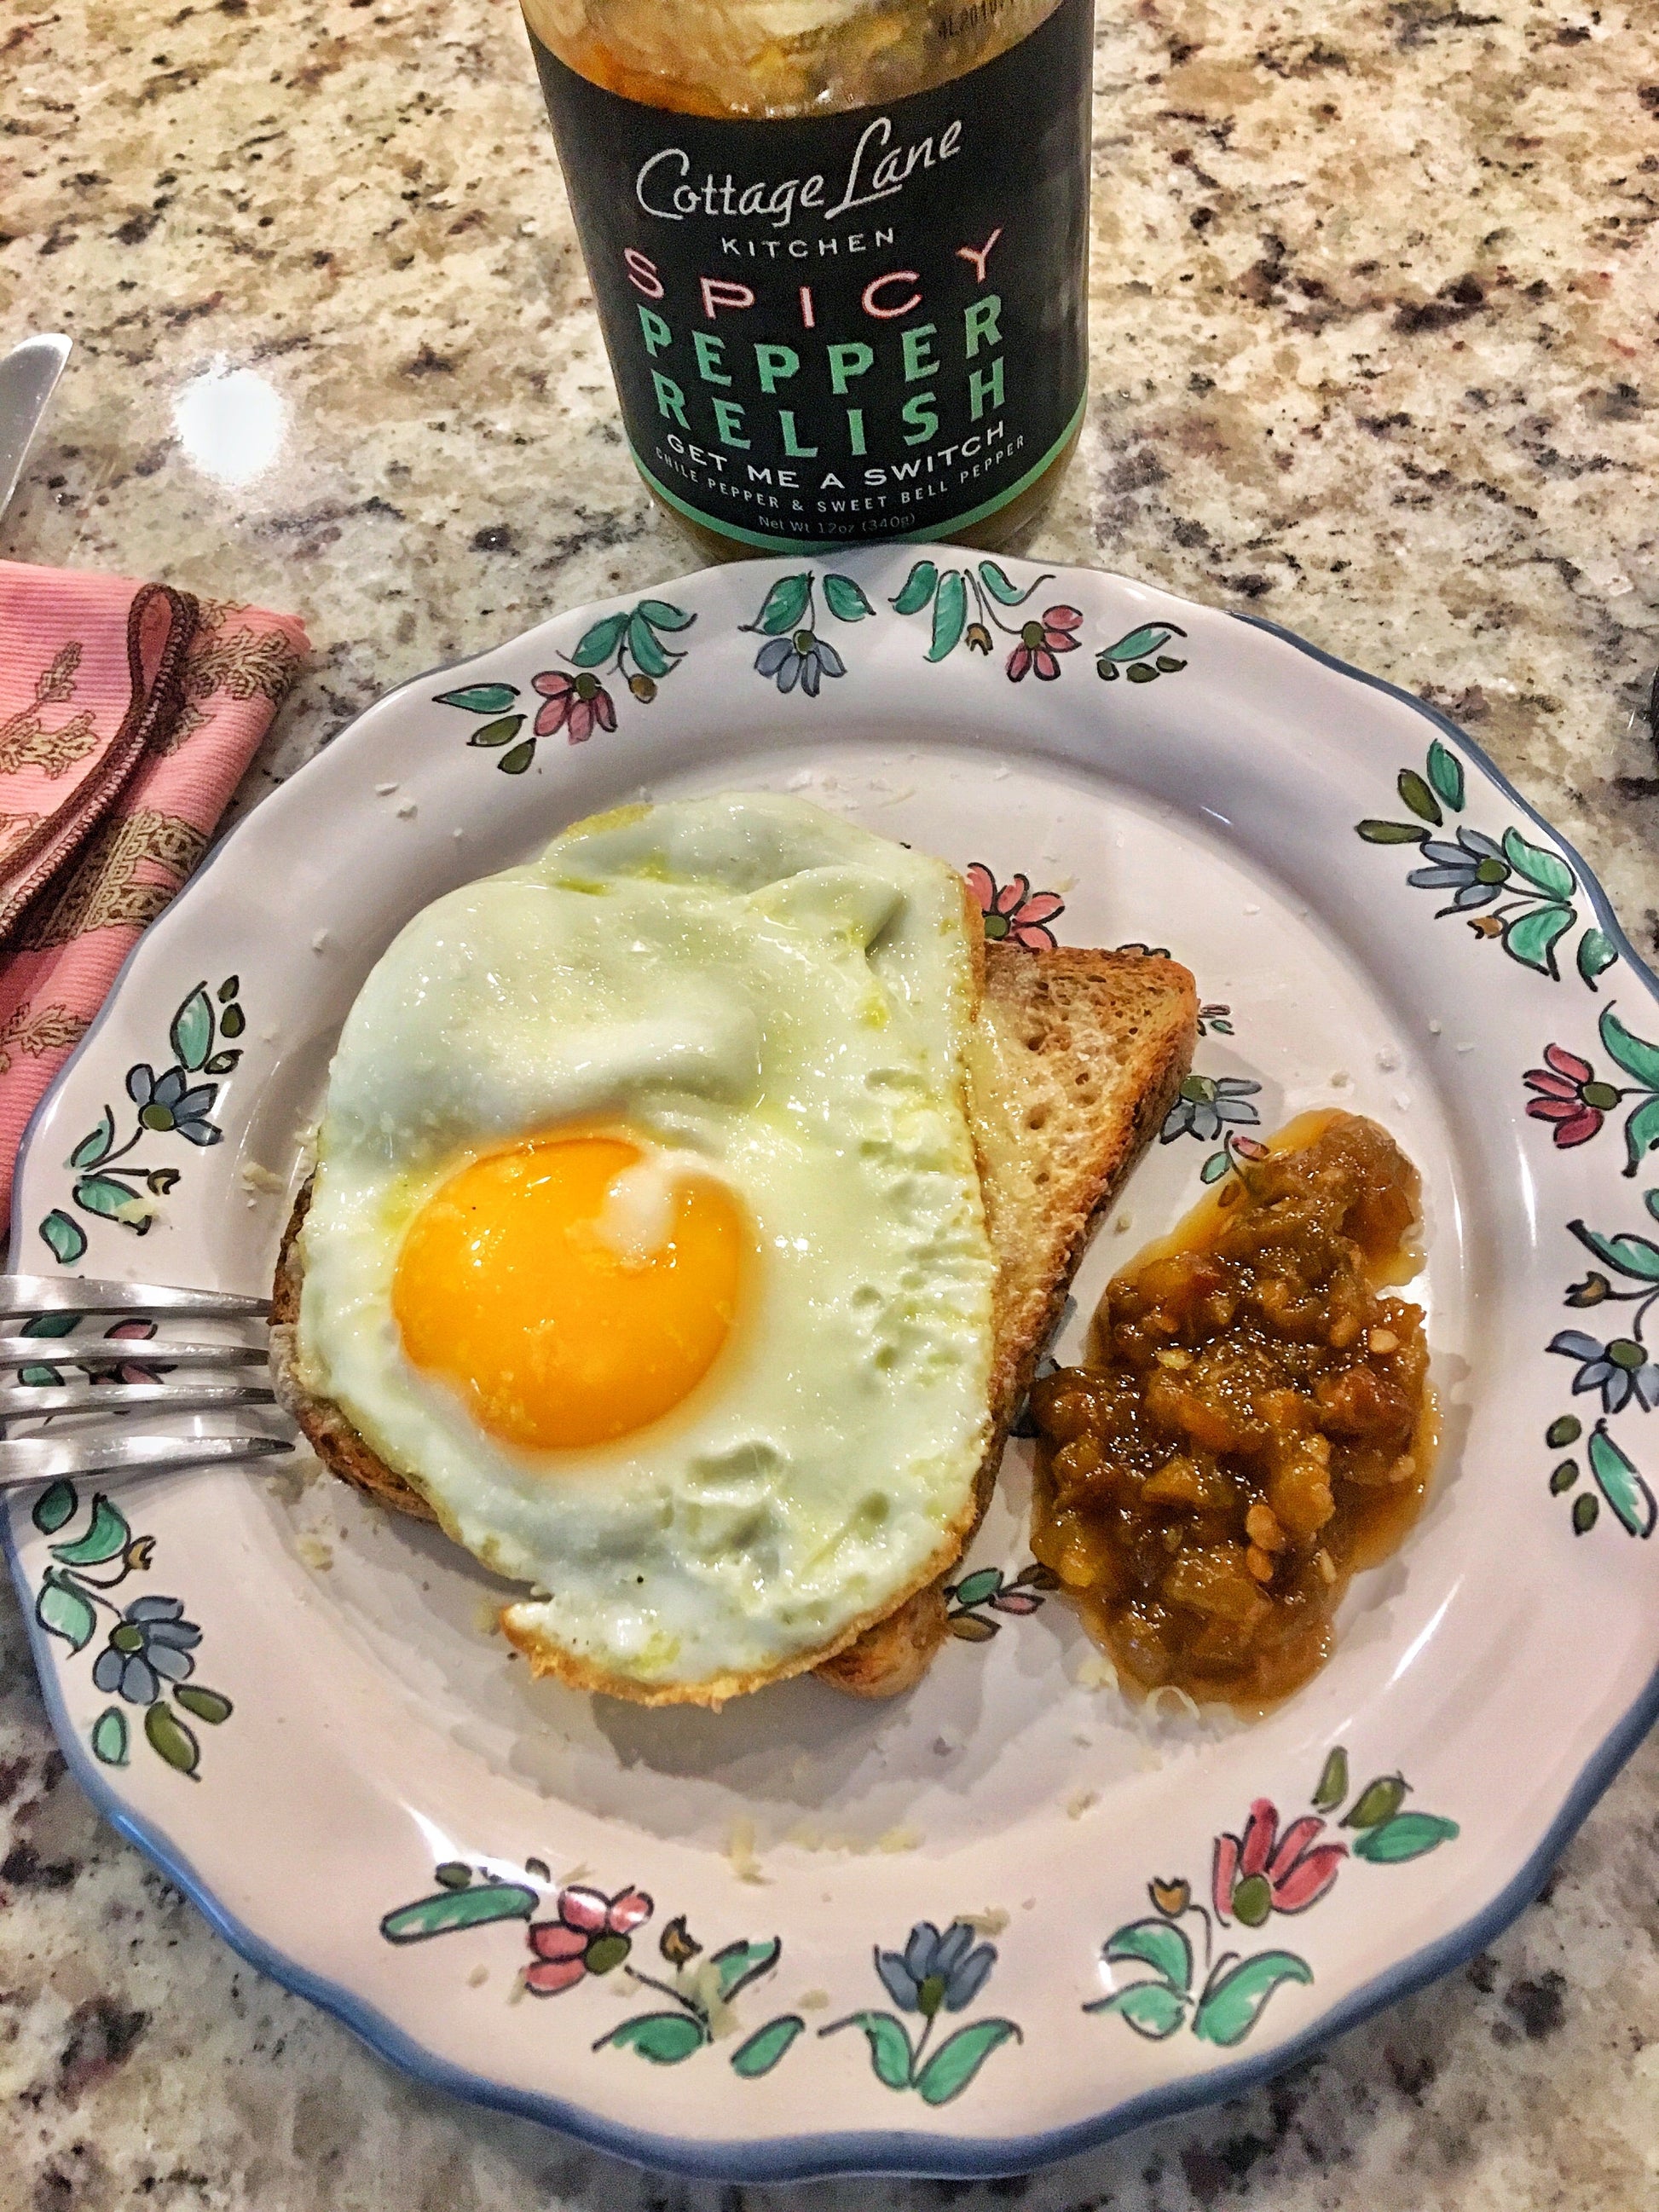 Fried Egg on Toast with Get Me A Switch Spicy Pepper Relish by Cottage Lane Kitchen